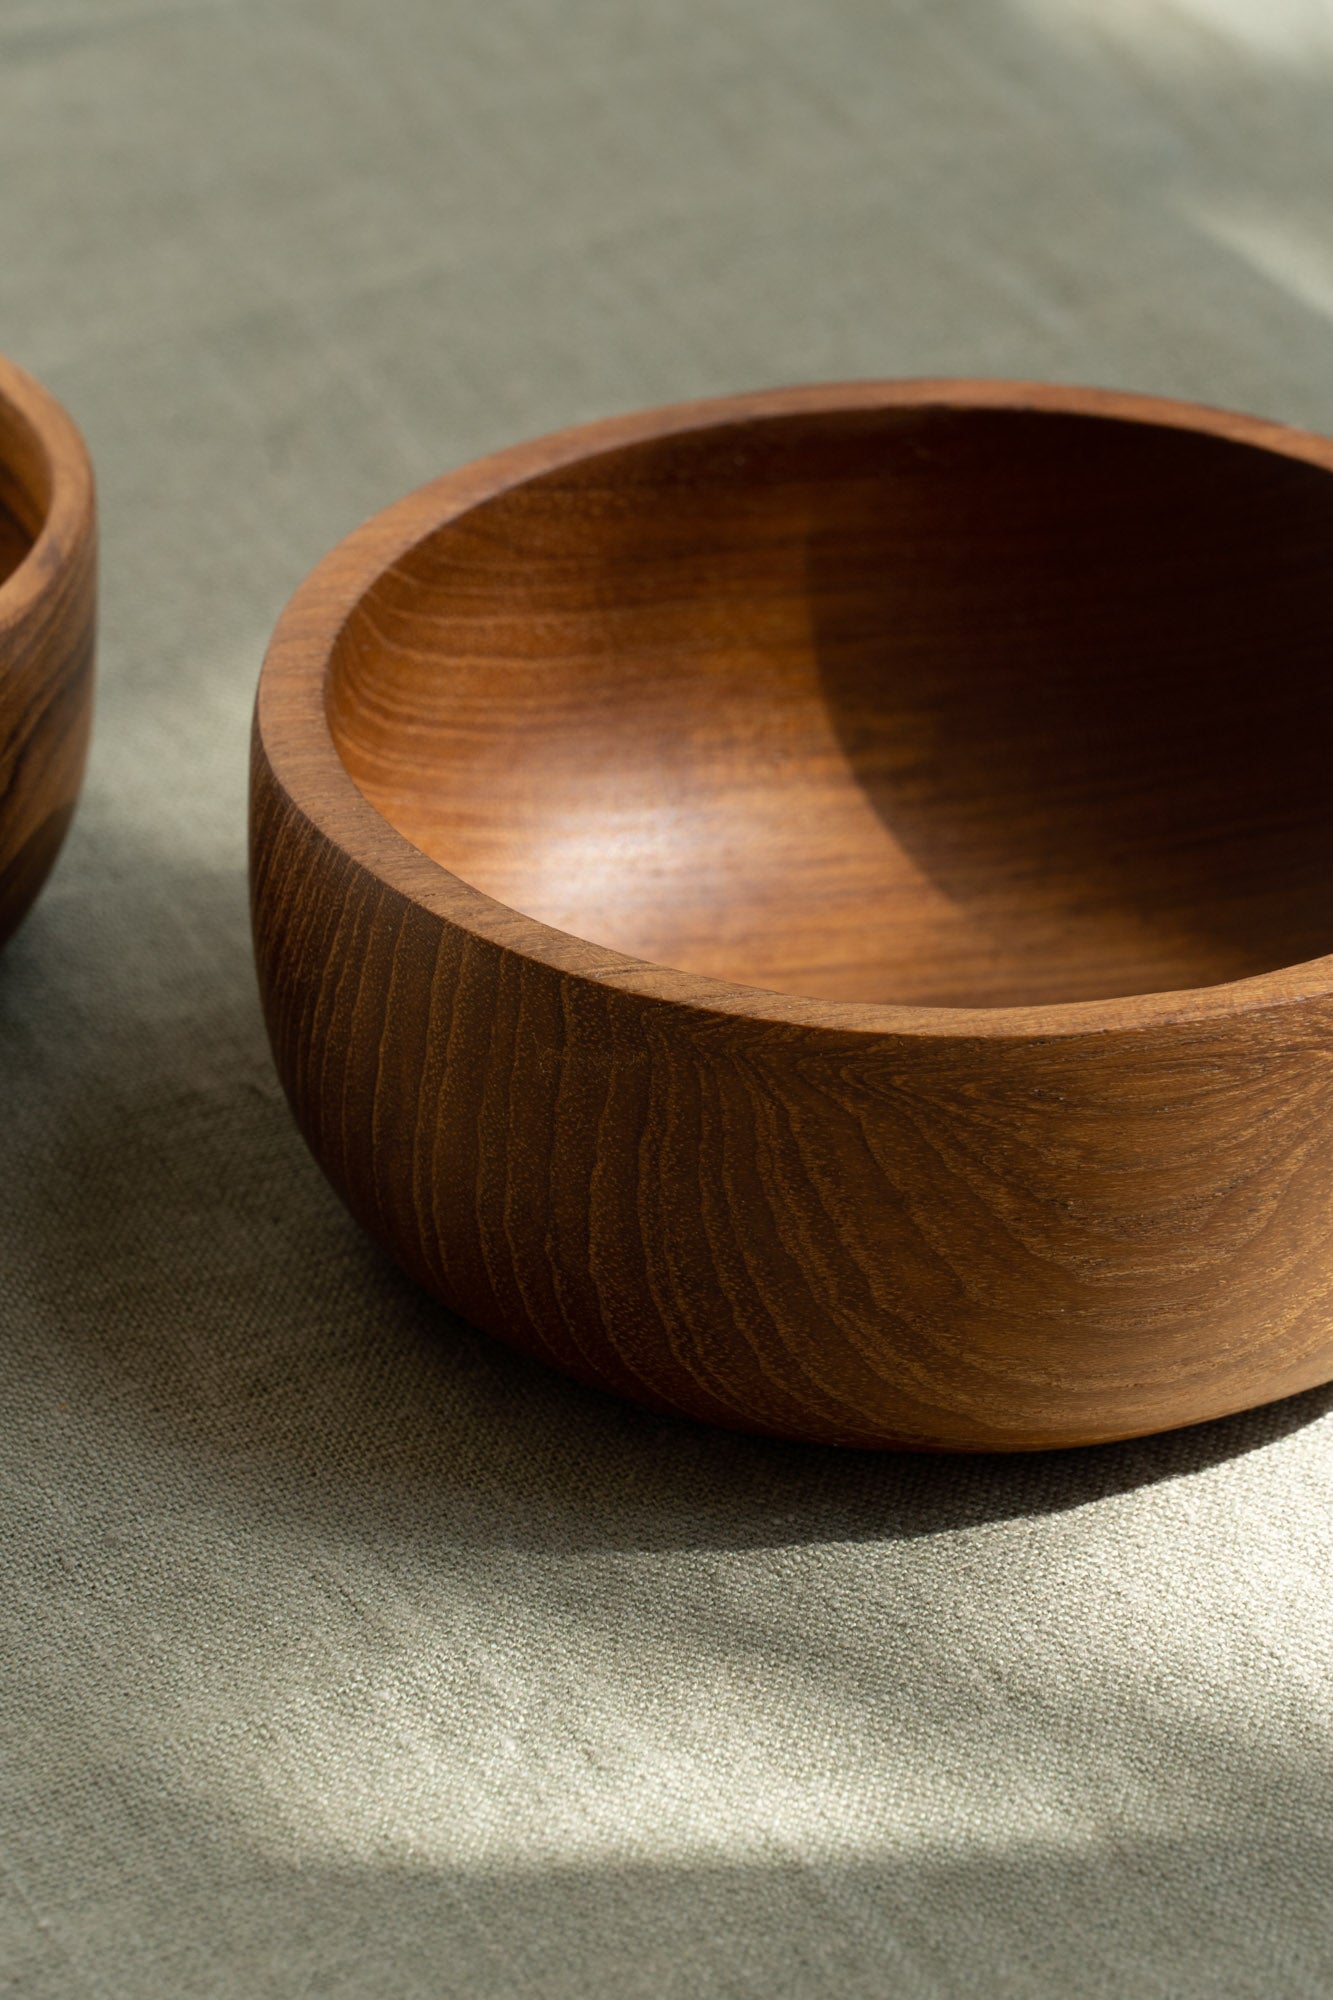 Close-up of the Nibble Wooden Bowl by The Loft Selects.